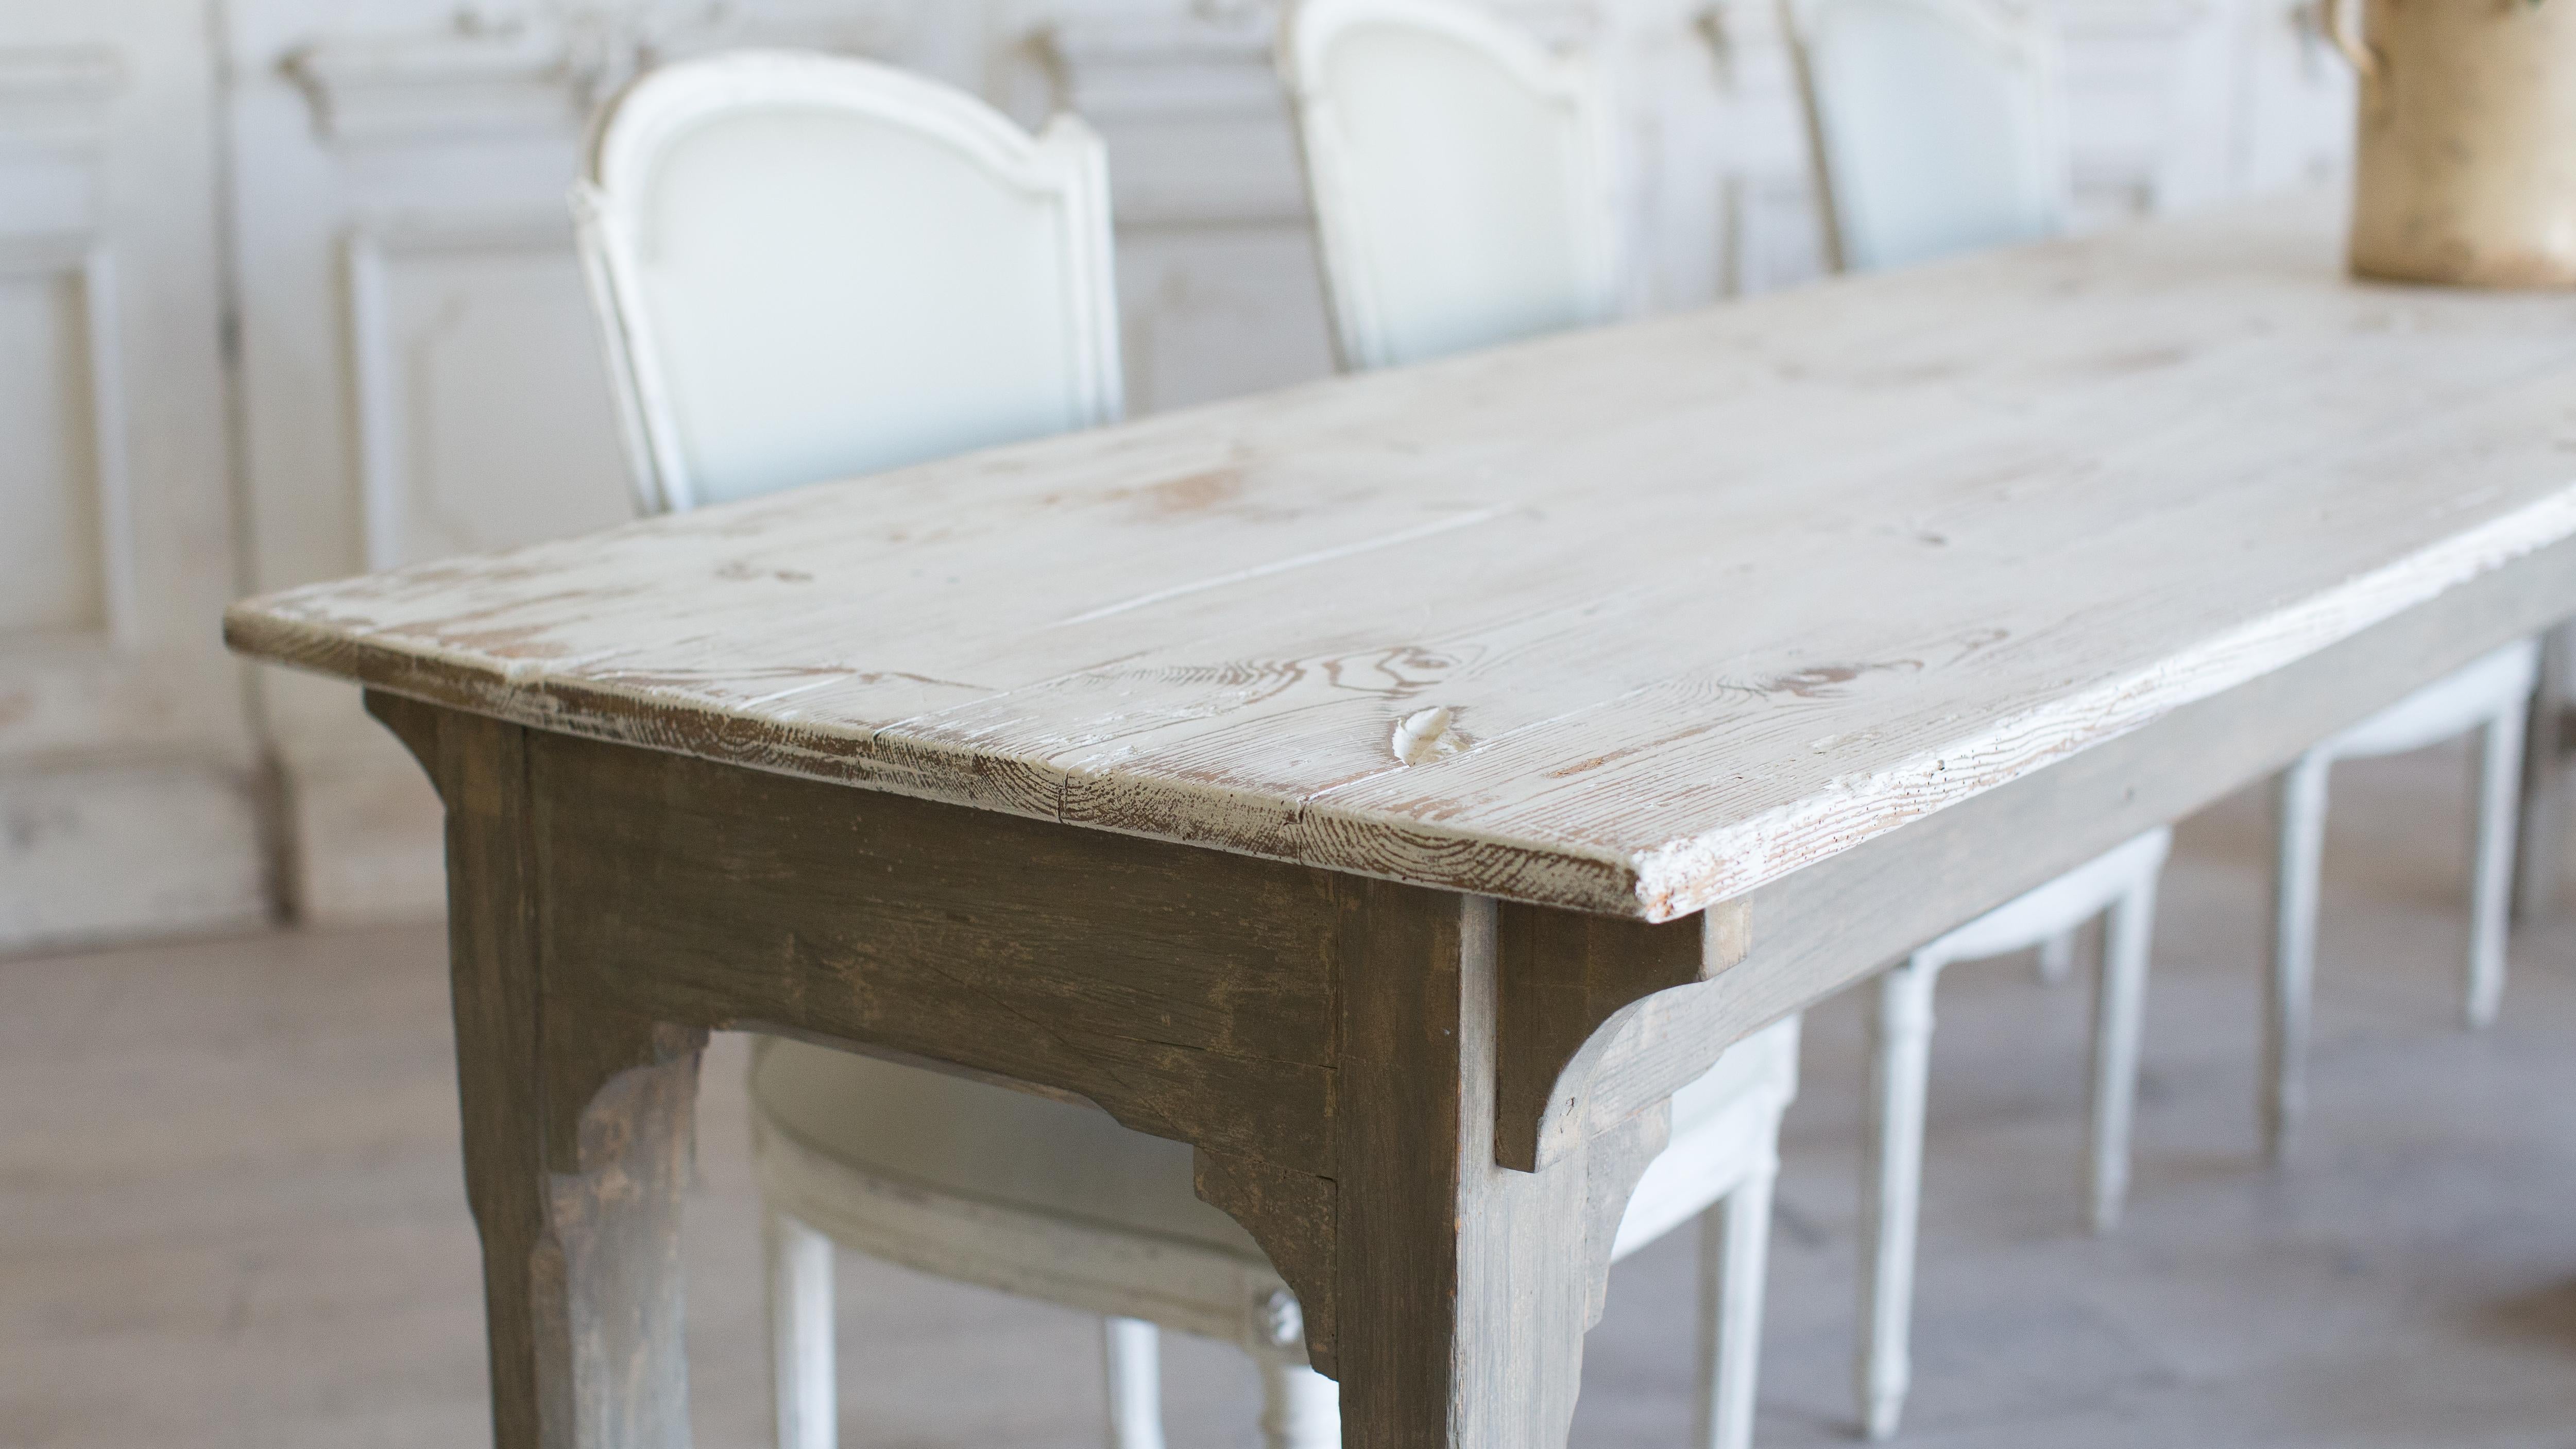 Stylish antique French Provincial farm table in pine. The sturdy base is painted an earthy olive while the top is a worn white that is fresh and fun. The clean arch detailing adds a sophistication to the table.